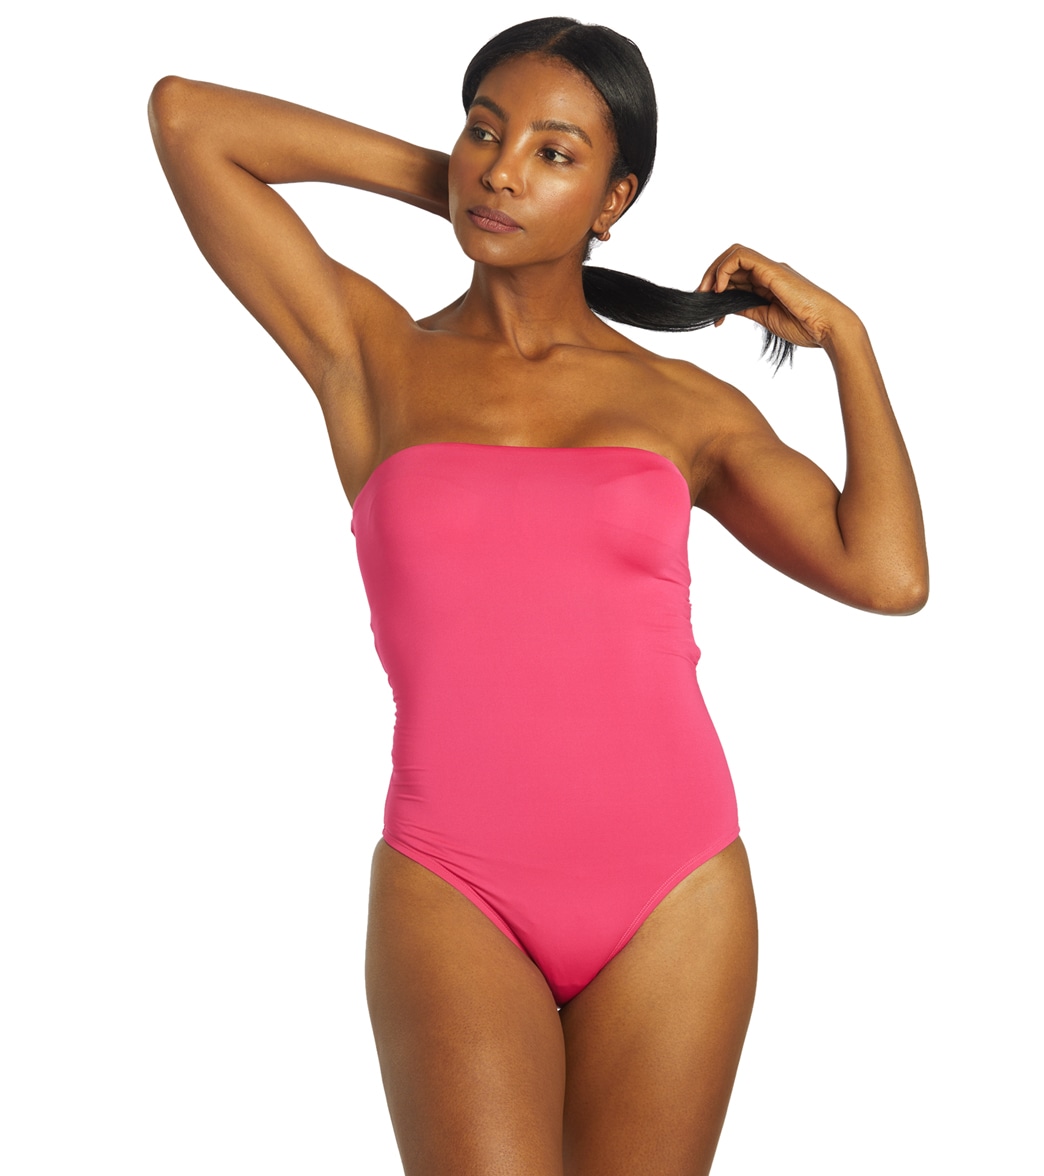 Nike Women's Solid Lace-Up Back Bandeau One Piece Swimsuit - Pink Prime Large - Swimoutlet.com